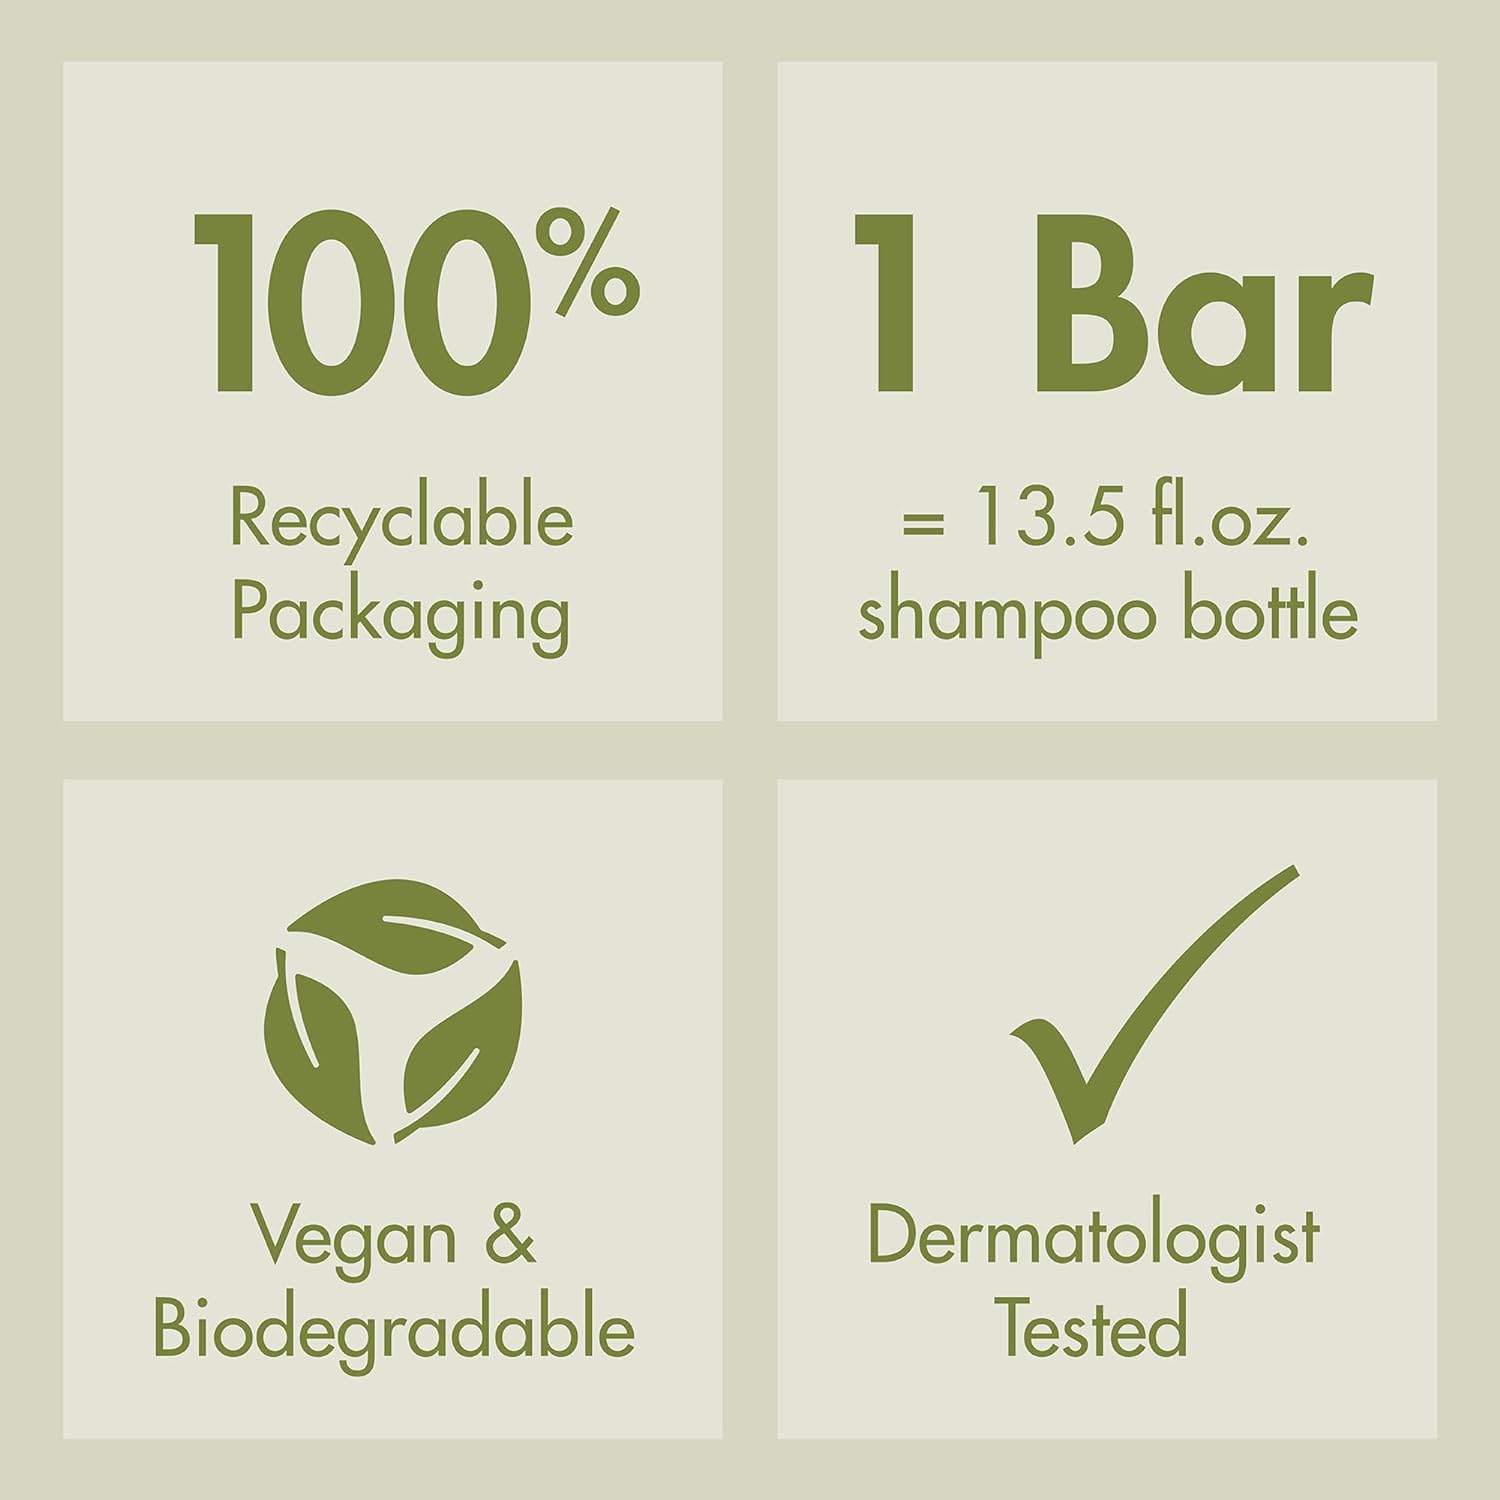 Klorane Ultra-Gentle Shampoo Bar with Oat Milk, Paraben, Preservative and Sulfate Free, Hypoallergenic, Eco-friendly, Biodegradable, Vegan, Dermatologist and Pediatric Tested : Beauty & Personal Care